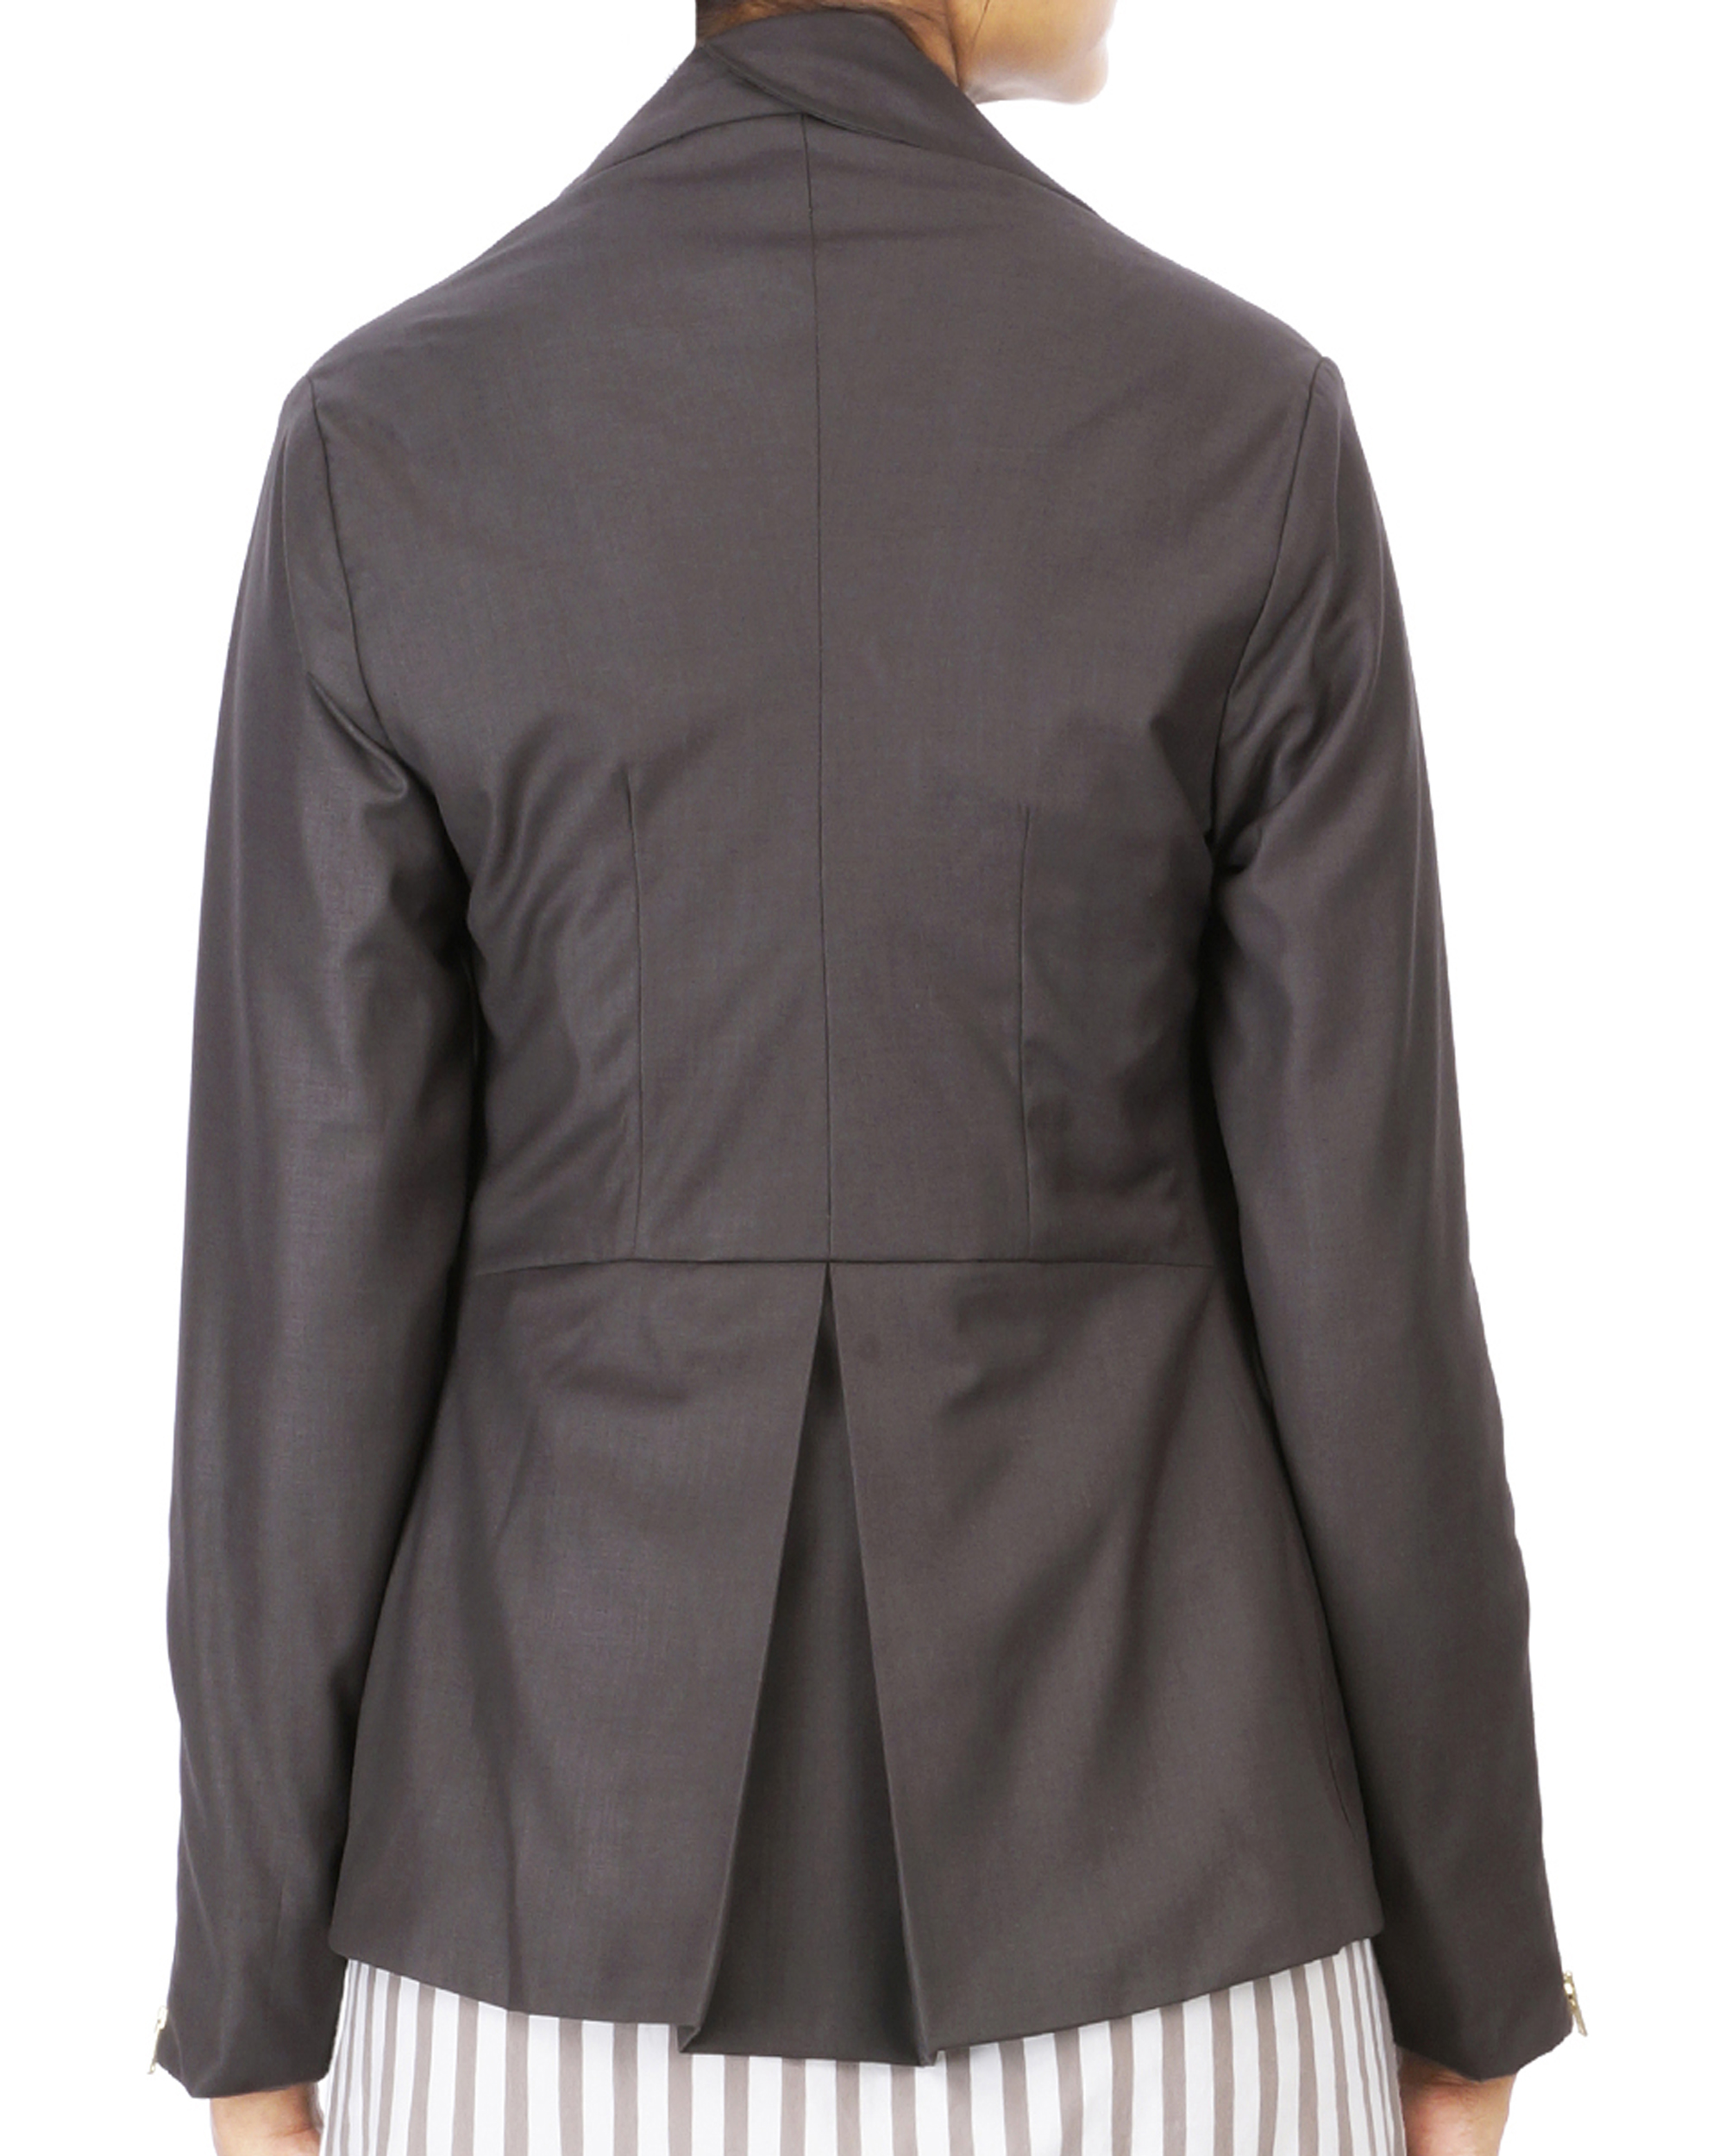 Single wing jacket by Six Buttons Down | The Secret Label